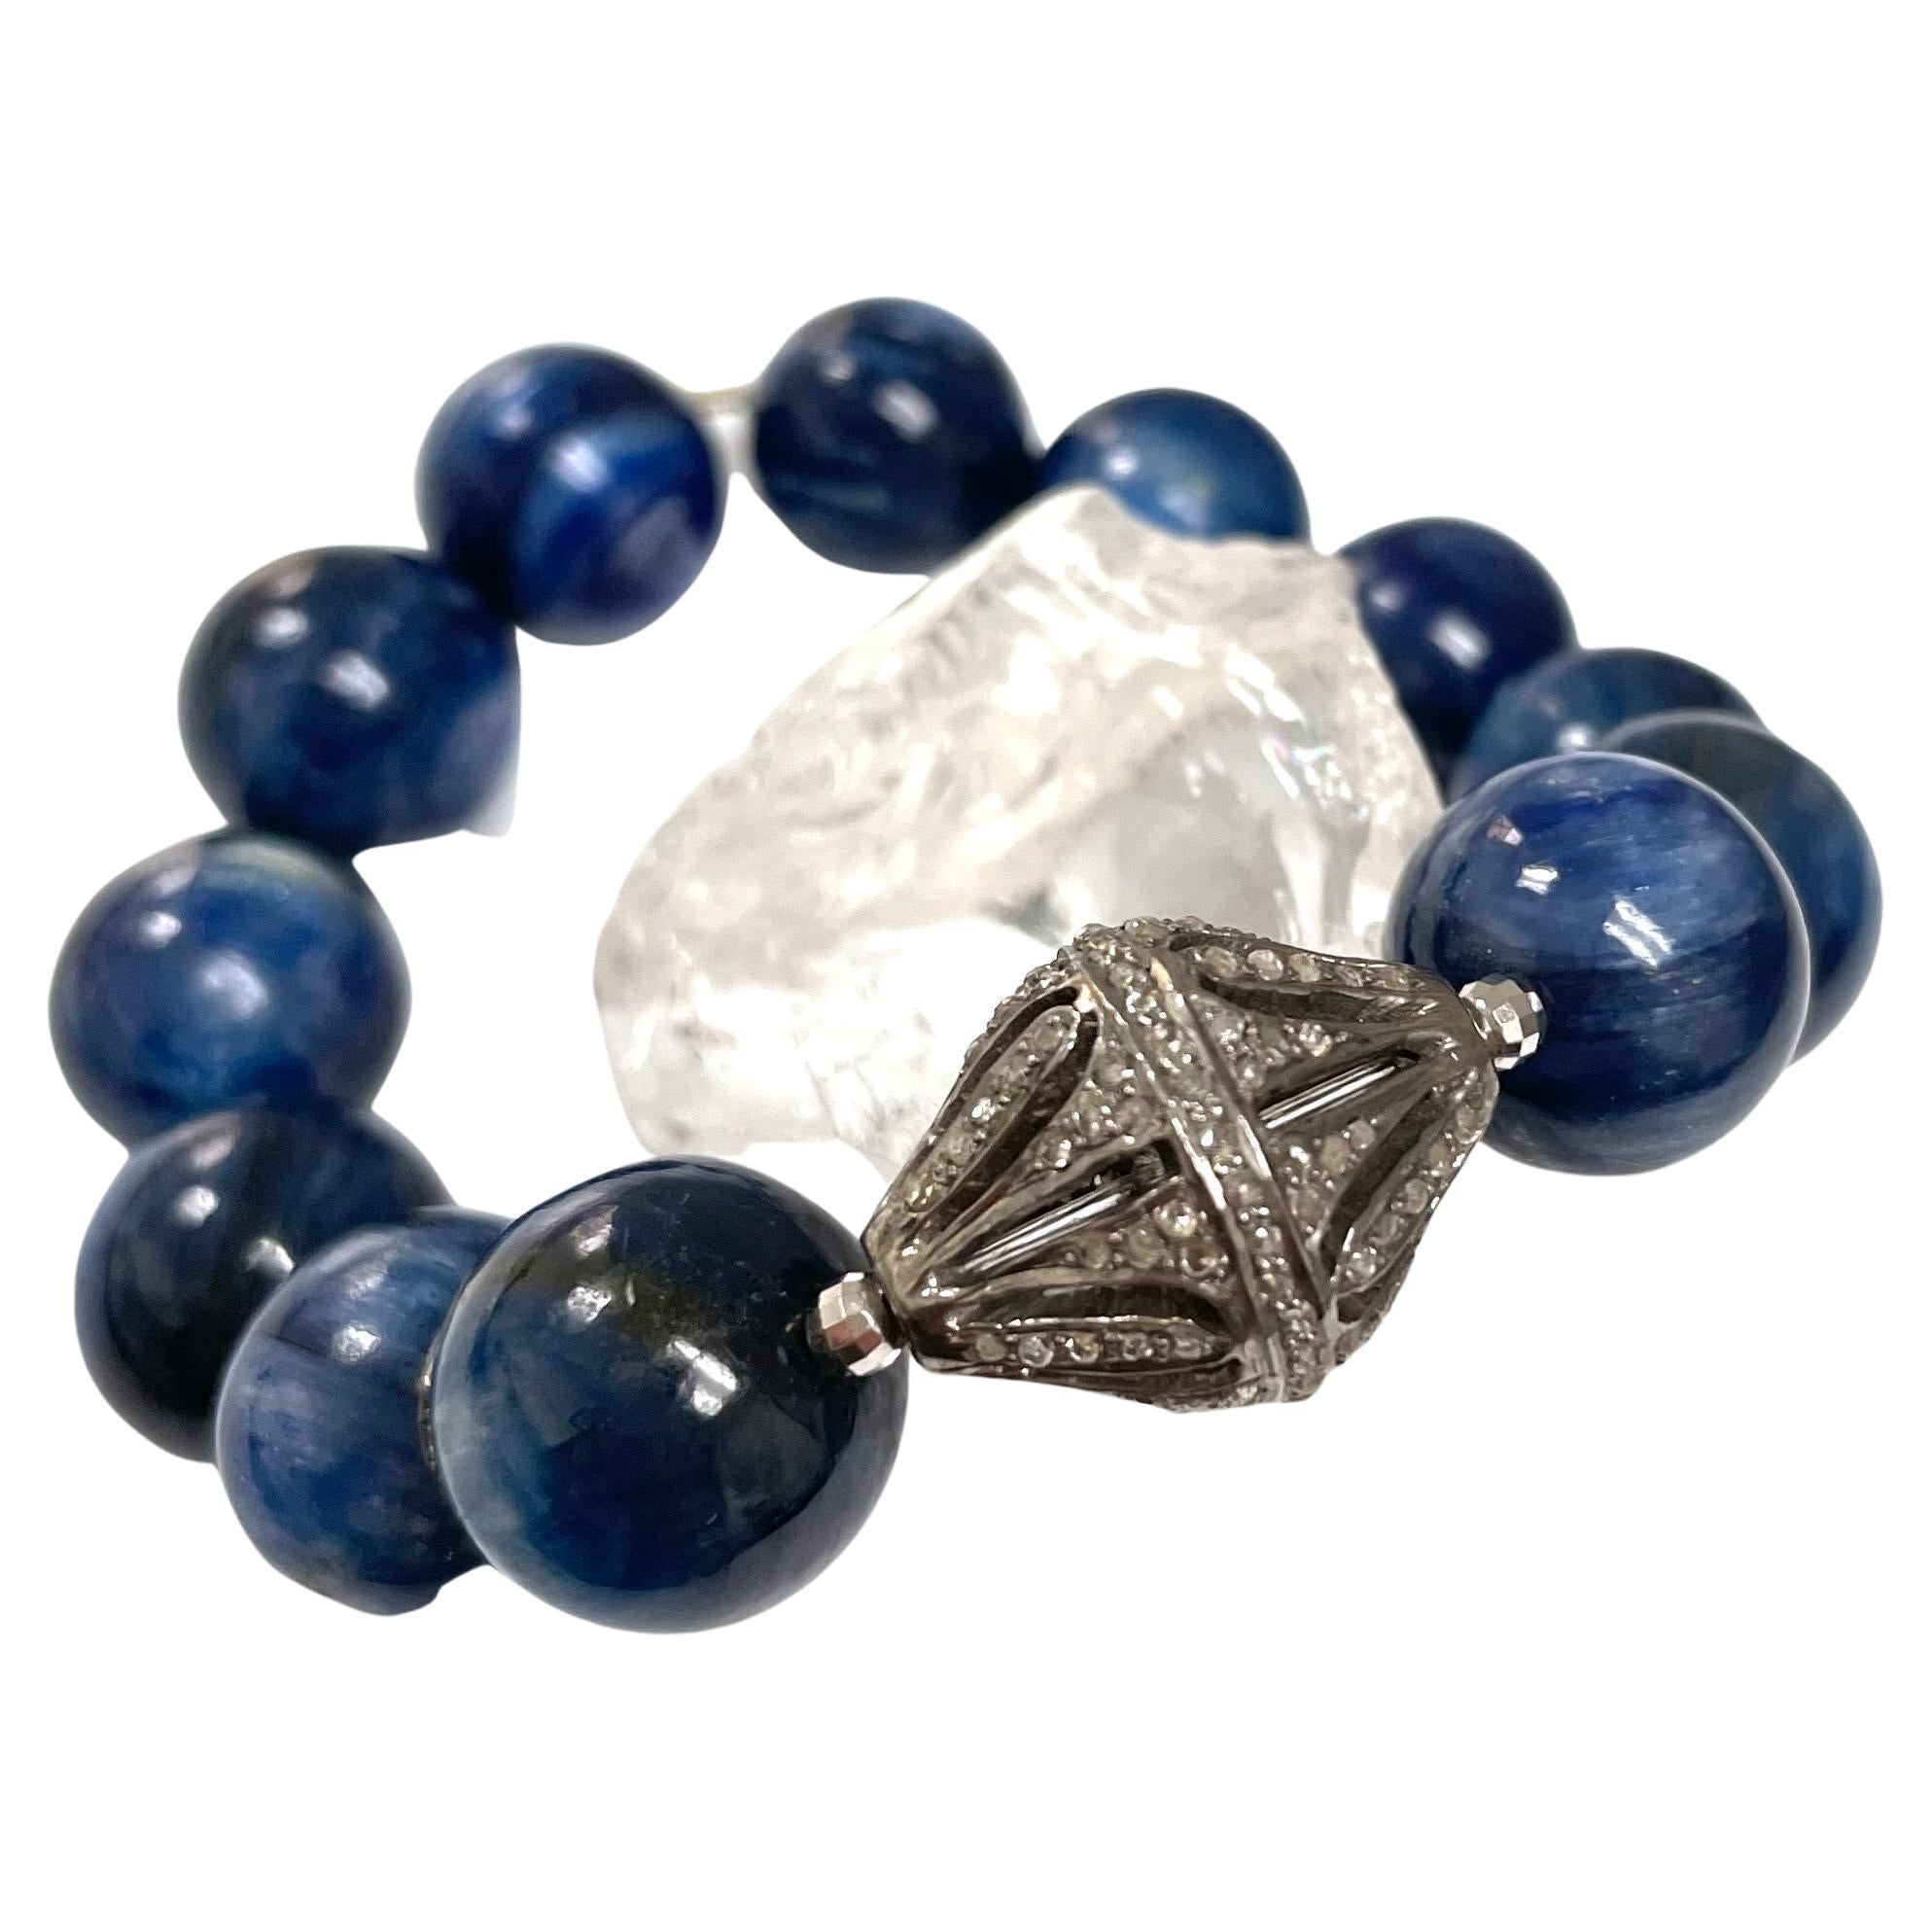 Description
Superior quality blue Kyanite stretchy bracelet, accented with a large 15x20 mm pave diamond centerpiece and rondelles. 
Item # B1102
Wear two together to make a statement, check out item# B1101, sold separately.
Also, see matching